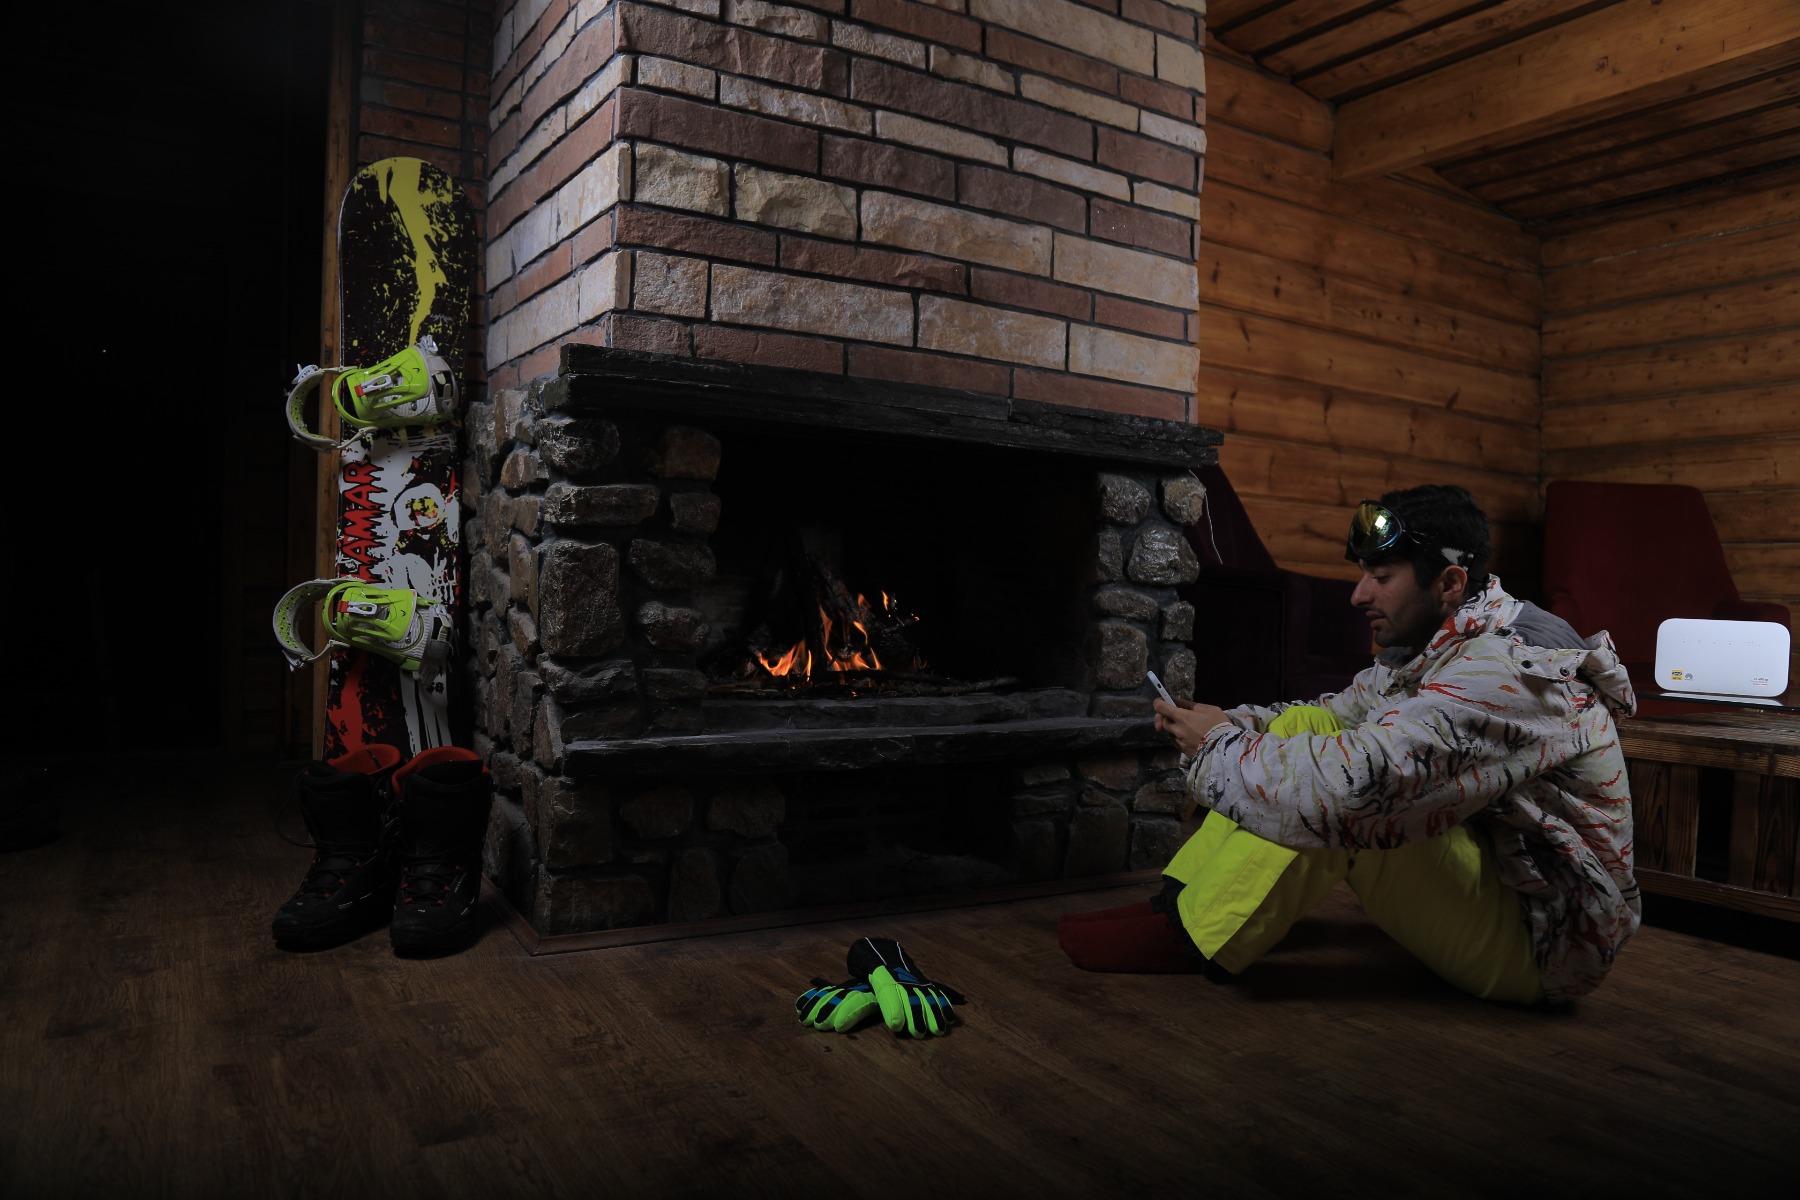 Man in snowboarding gear sitting next to open fireplace